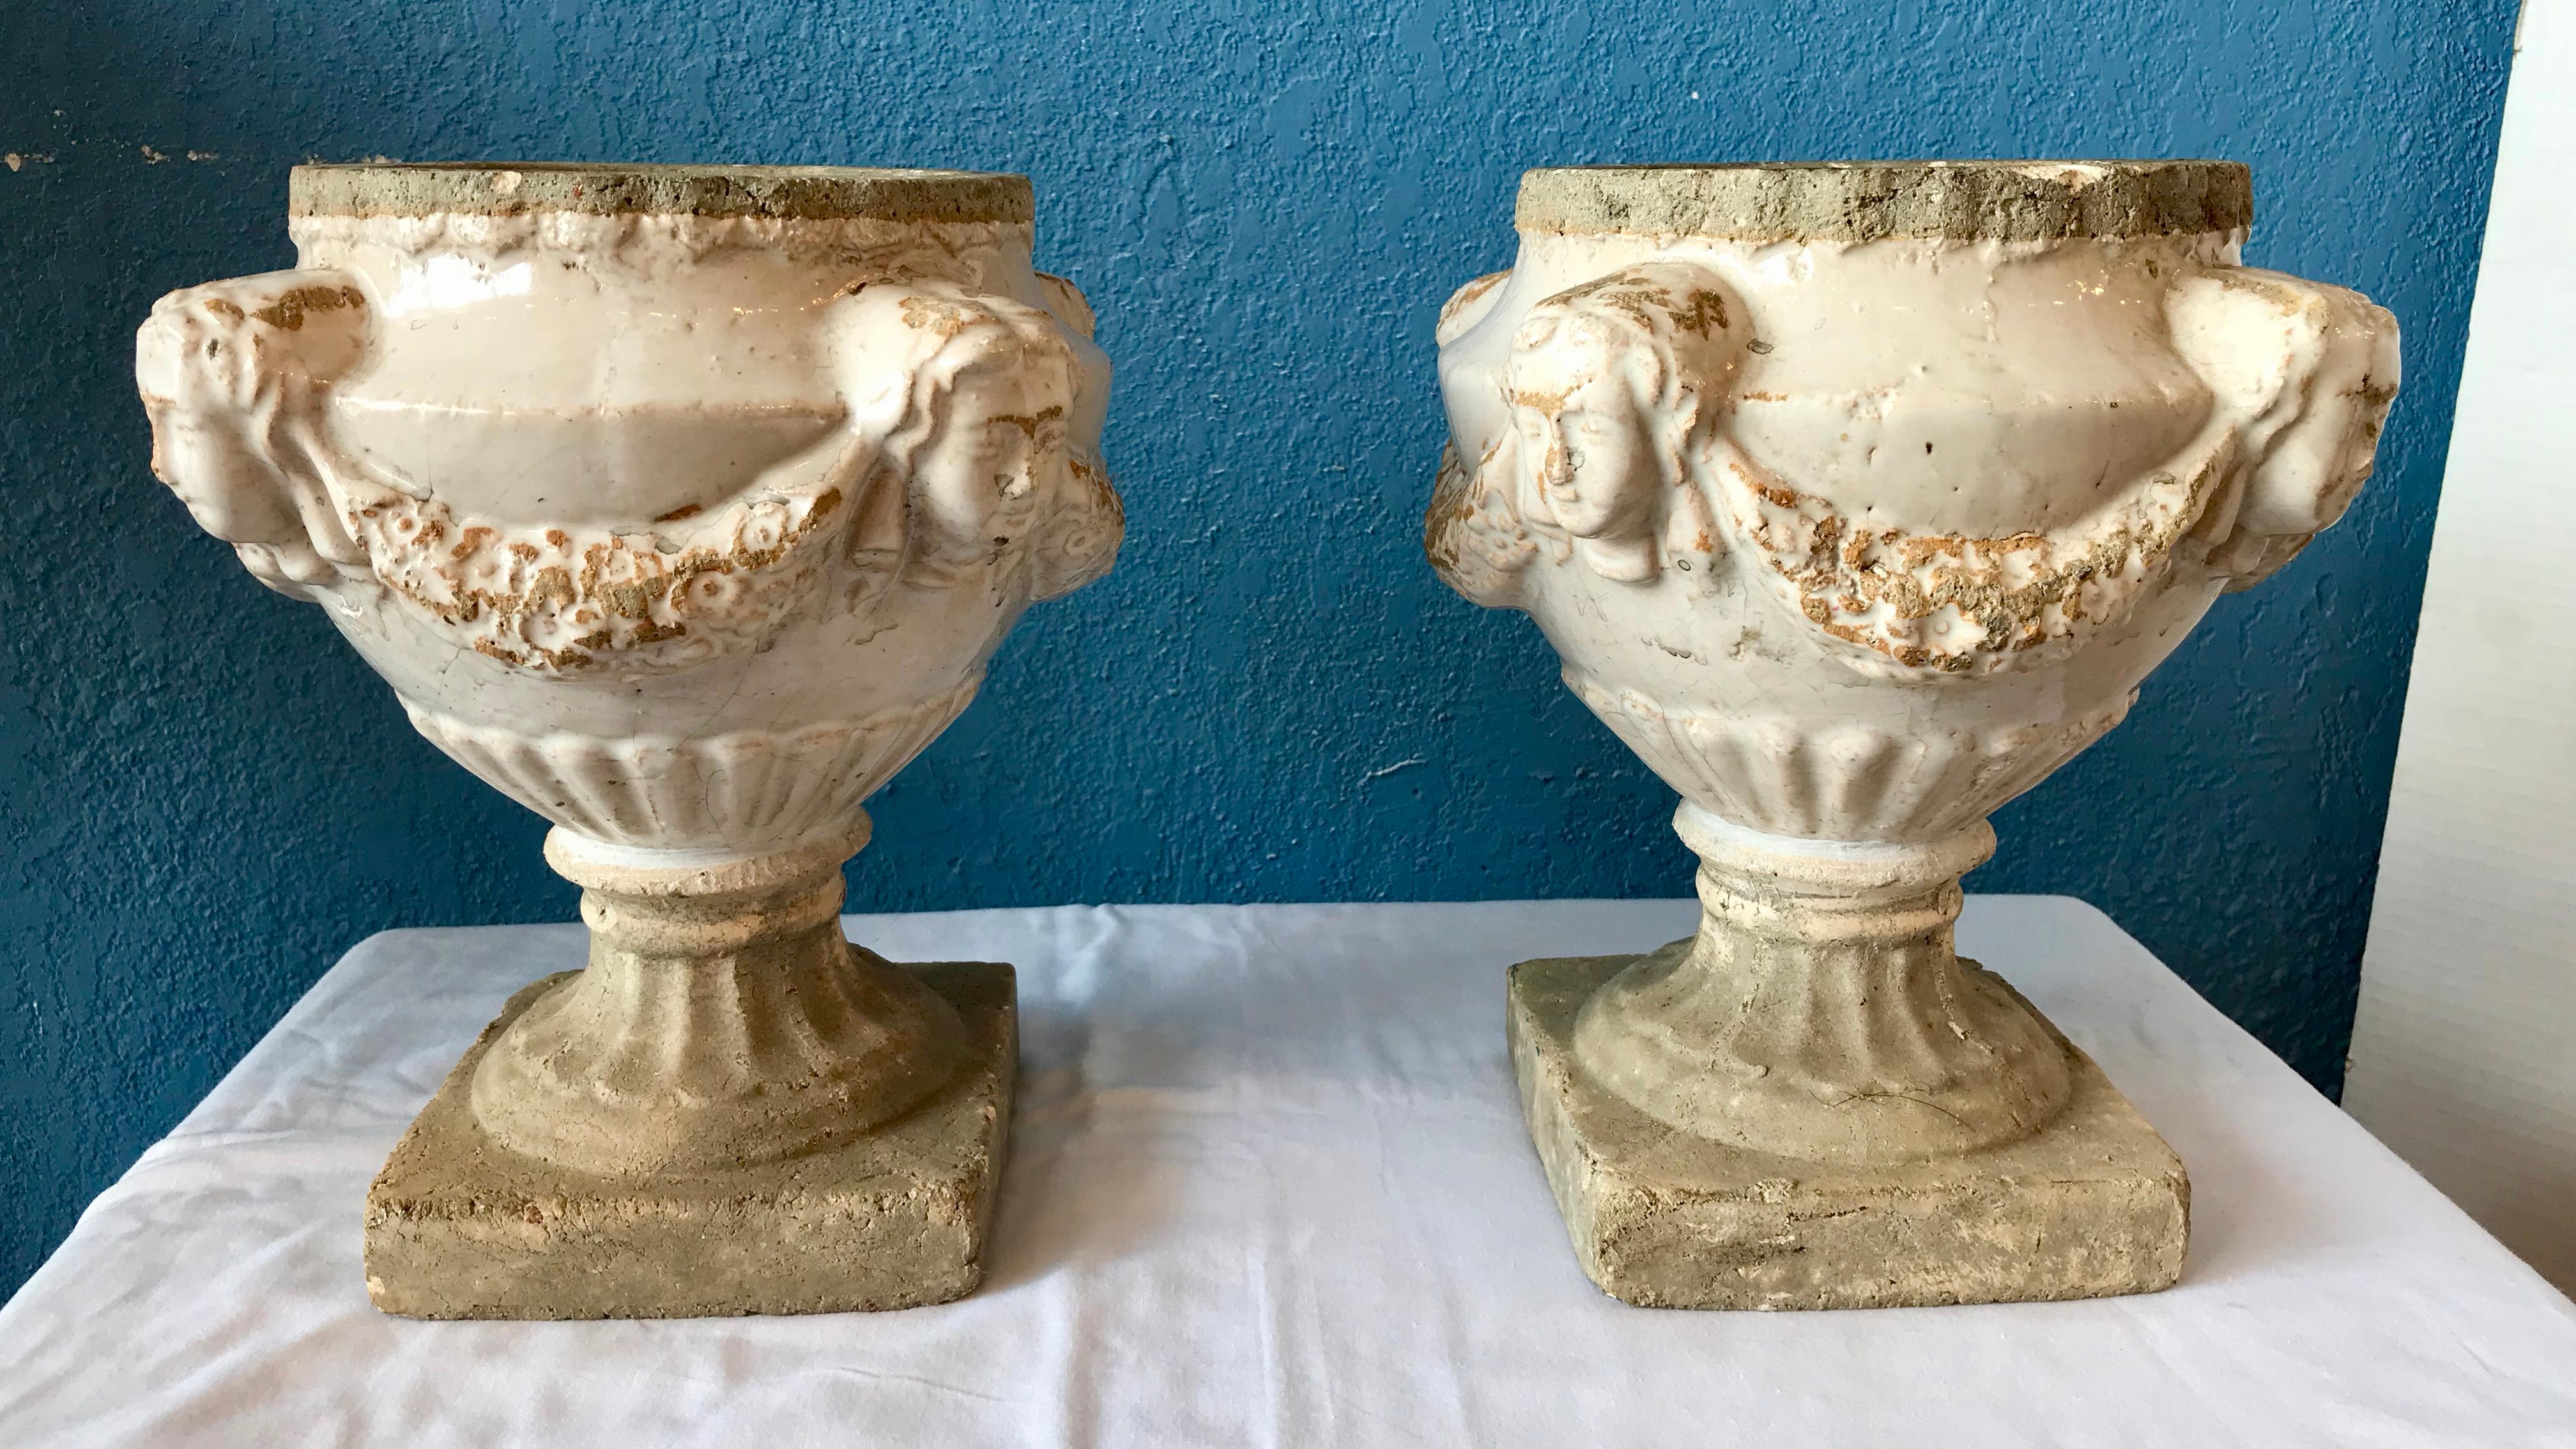 Old Continental glazed  pots fashioned with protruding faces,
and adorned with swags.
Most unusual scale and design.